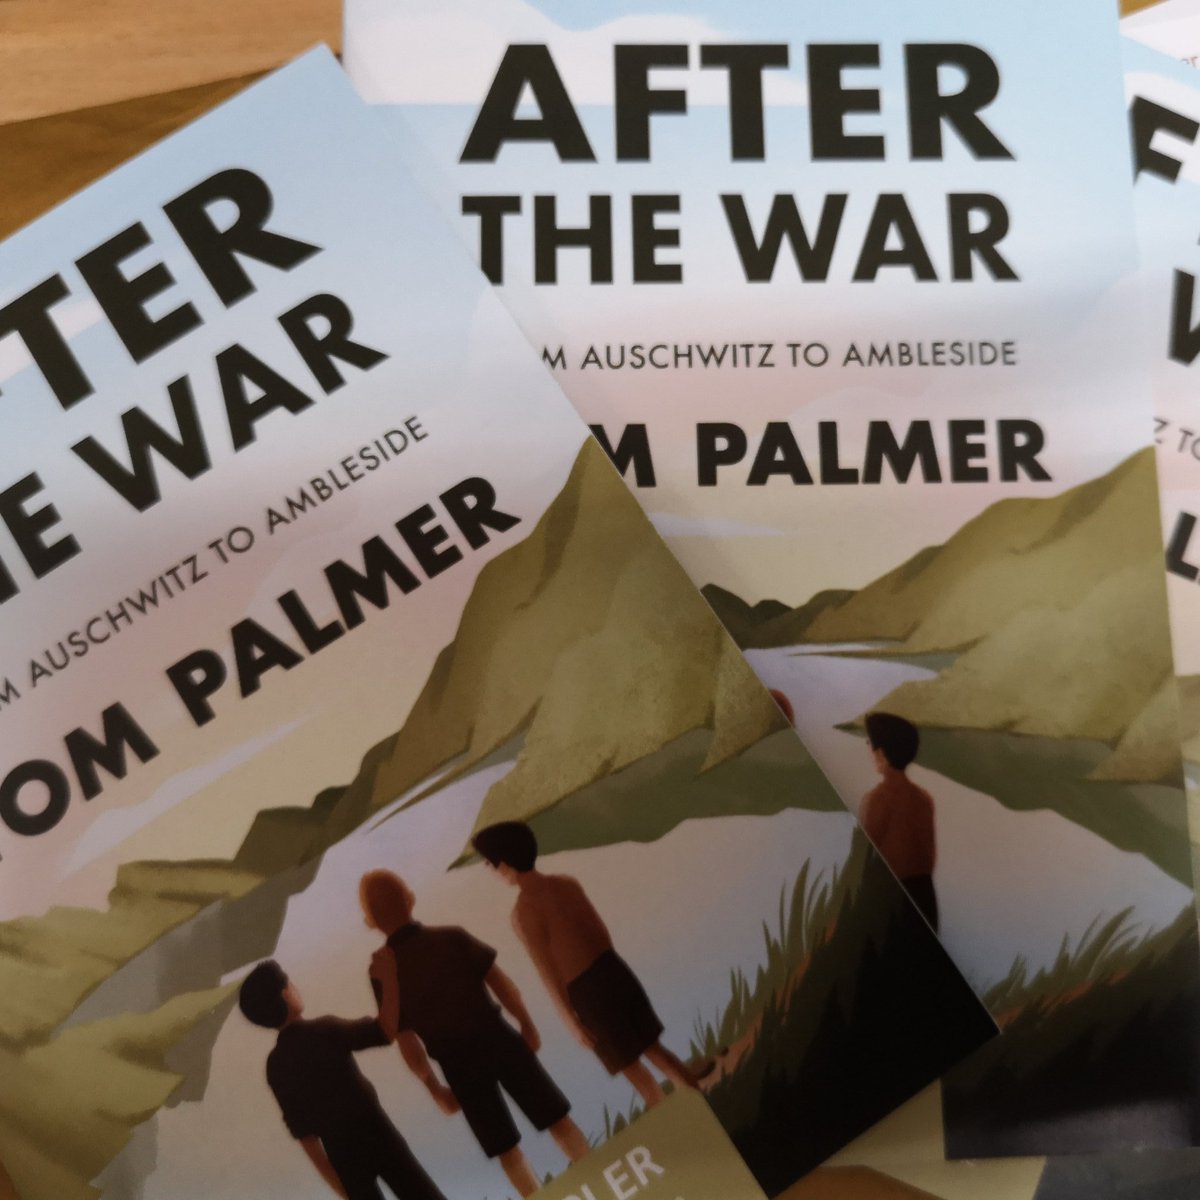 Very much enjoying this sampler from @BarringtonStoke of @tompalmerauthor new book #AfterTheWar. Can't wait to read the rest! A fascinating story, completely new to me despite spending so much time in #Ambleside and #TheLakeDistrict